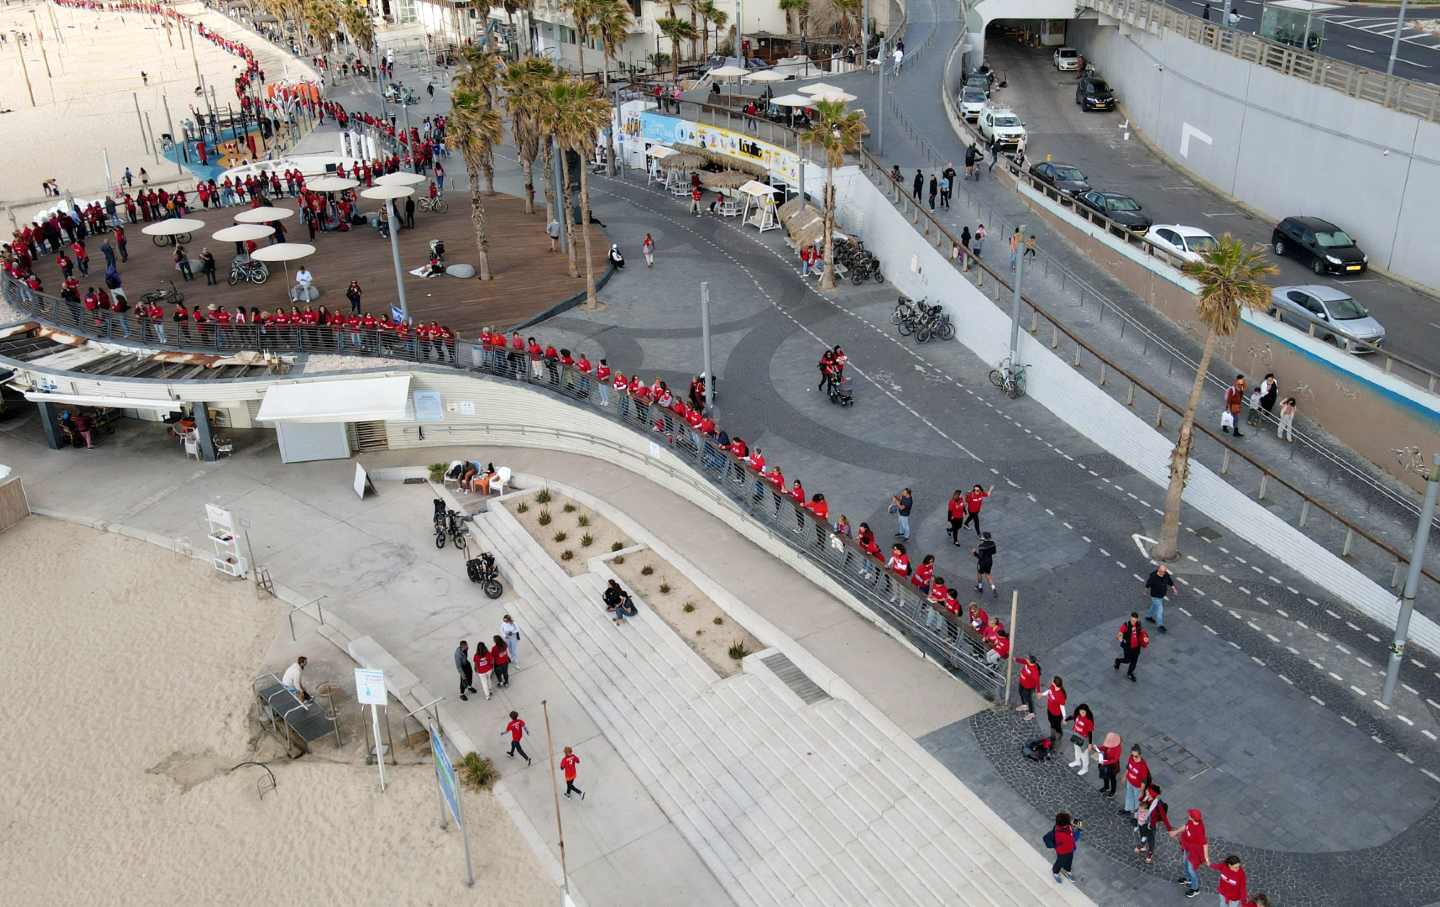 In this aerial view, protesters supporting women's rights are dressed in red as they form a human chain on International Women's Day in Tel Aviv on March 8, 2023.